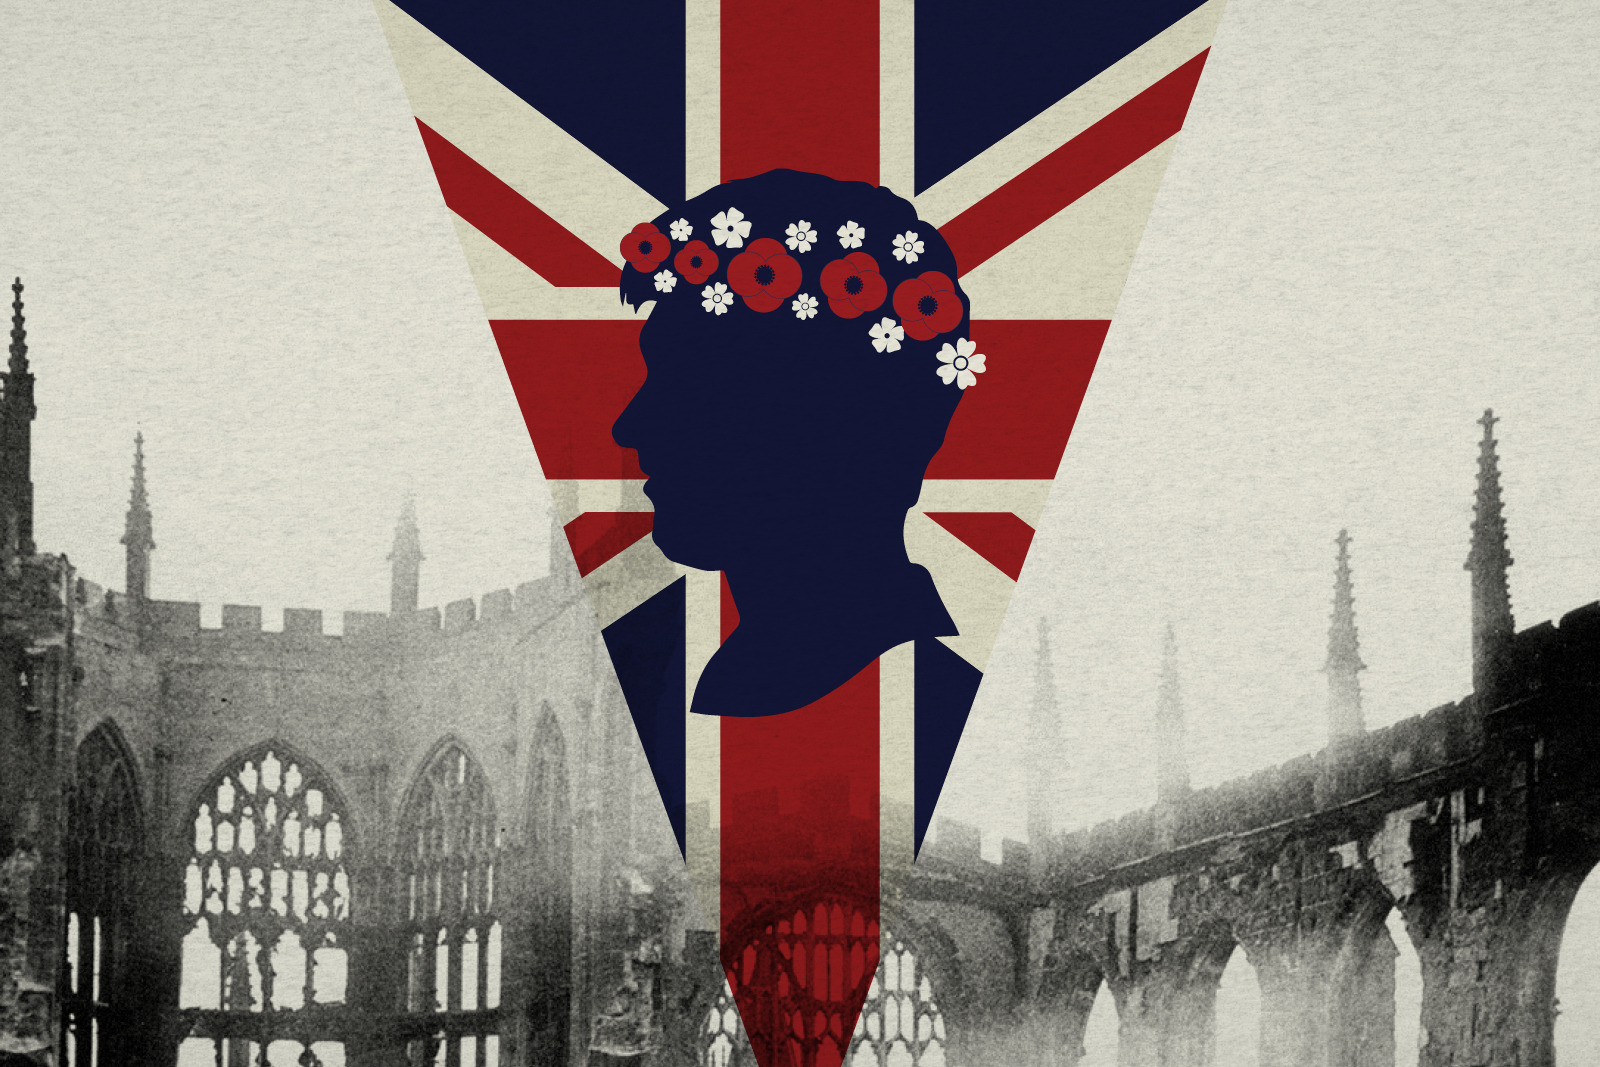 An old castle rampart, a British flag, and a cut out silhouette of a man's head.